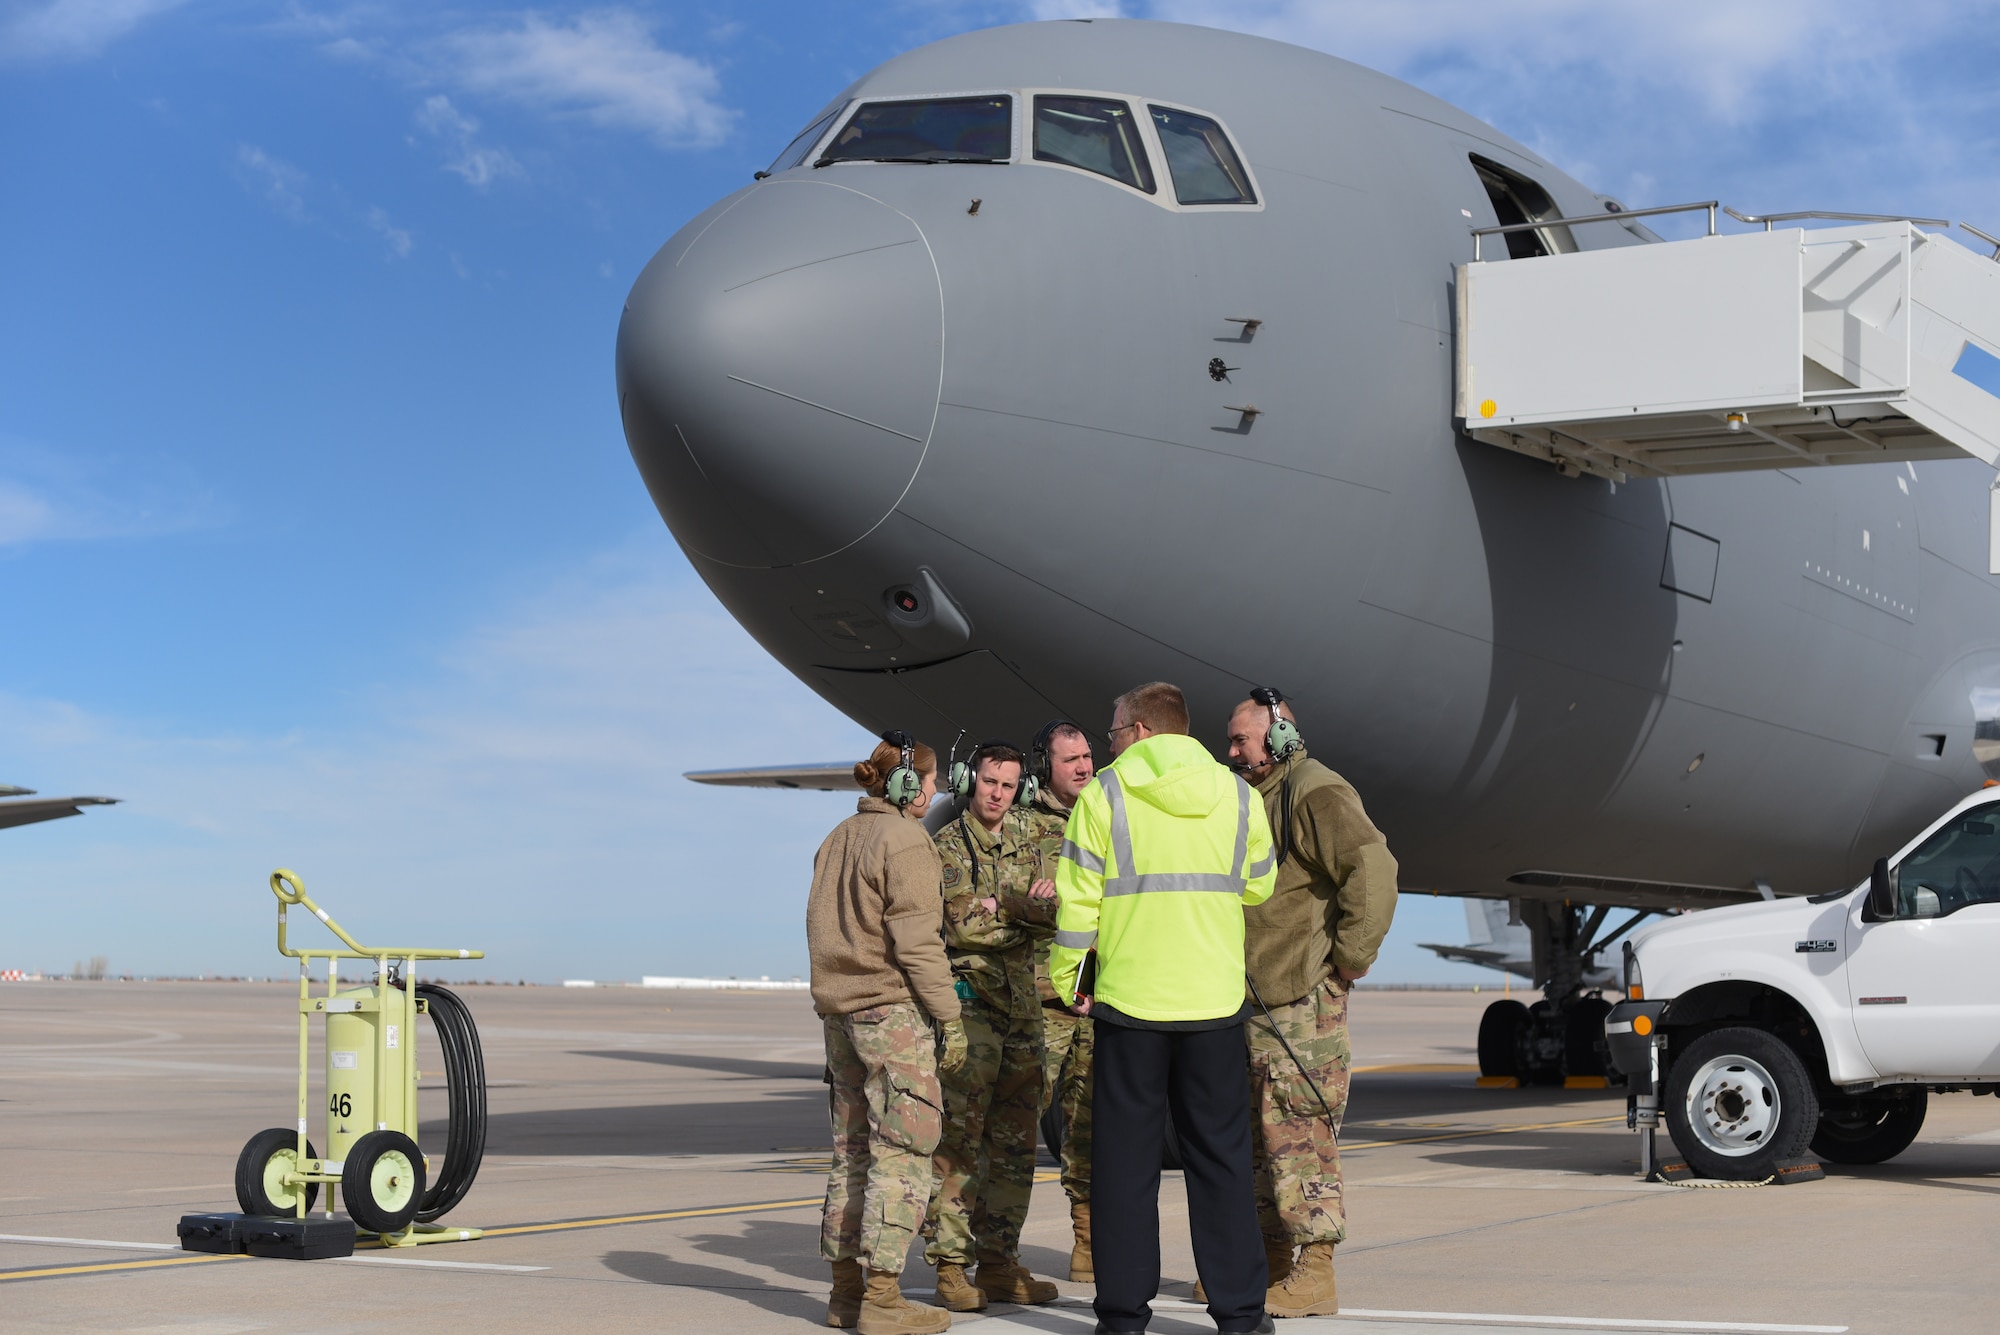 Members of the 22nd Maintenance Group discuss engine start procedures Feb. 14, 2019, at McConnell Air Force Base, Kan. The KC-46A Pegasus will serve alongside the KC-135 Stratotanker supplying critical aerial refueling, airlift and aeromedical evacuation capabilities for America's military and its allies. (U.S. Air Force photo by Airman 1st Class Alexi Myrick)